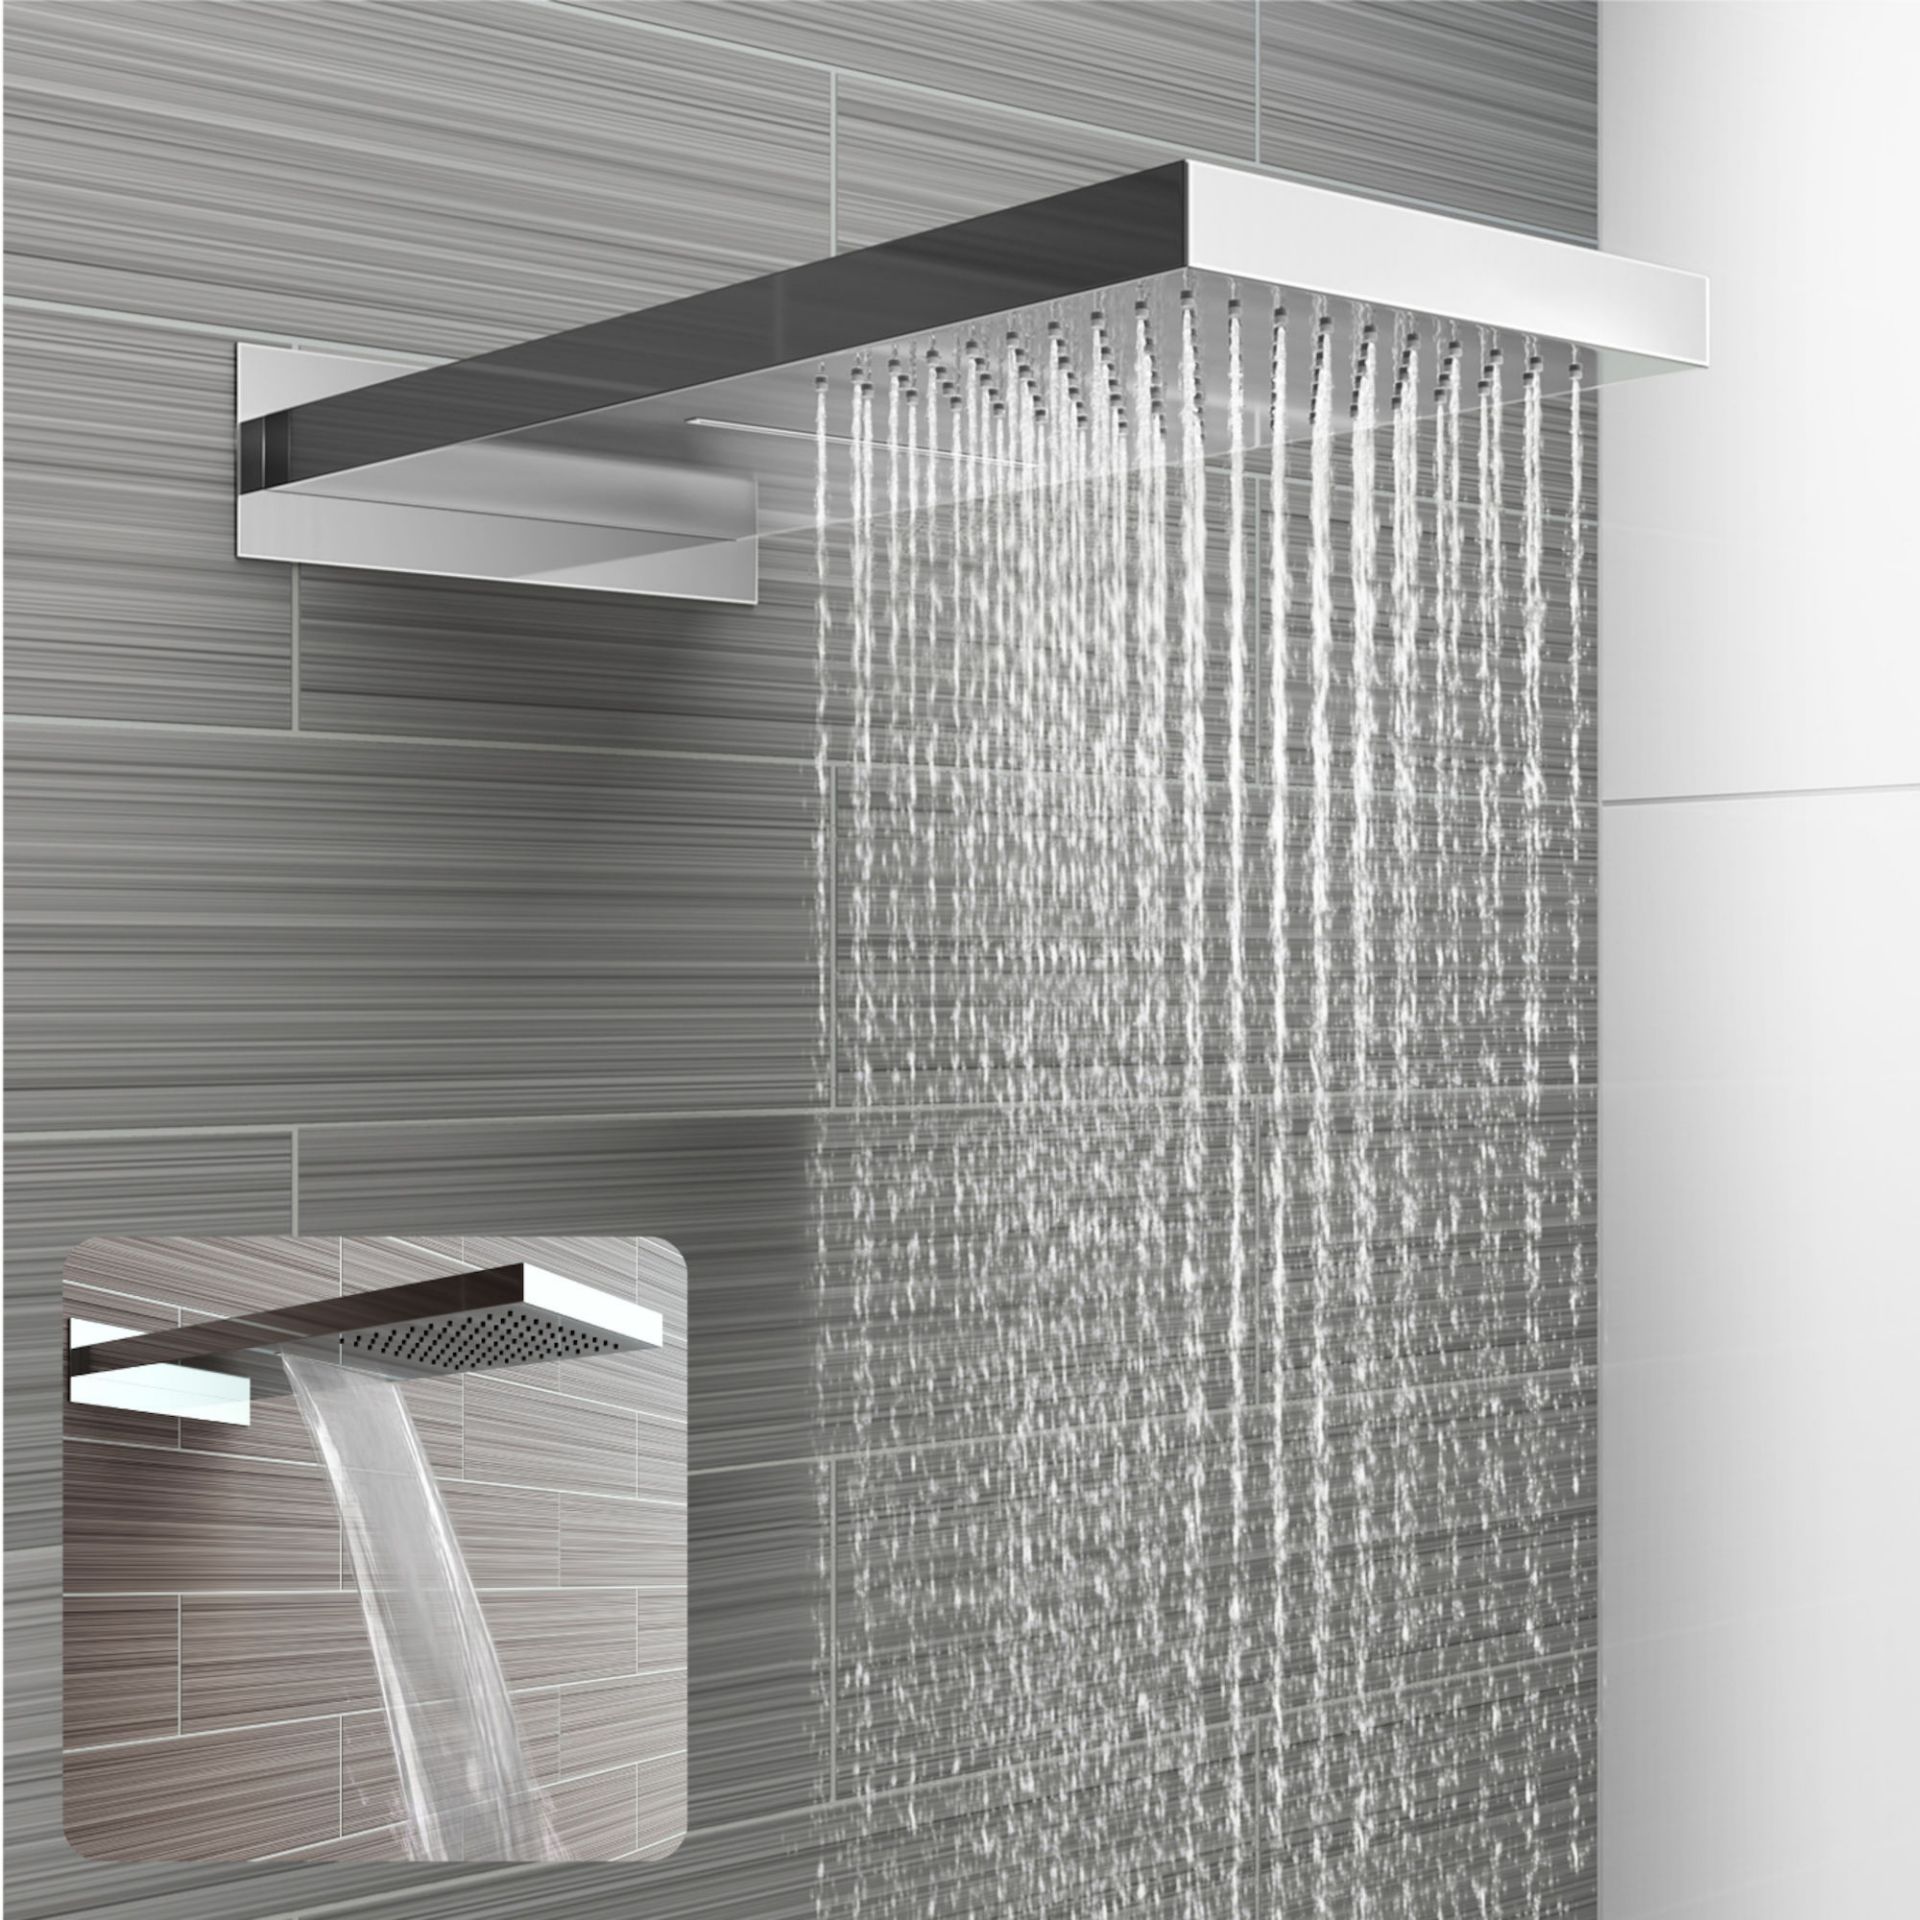 (XM47) Stainless Steel 230x500mm Waterfall Shower Head. RRP £374.99. Dual function waterfall and